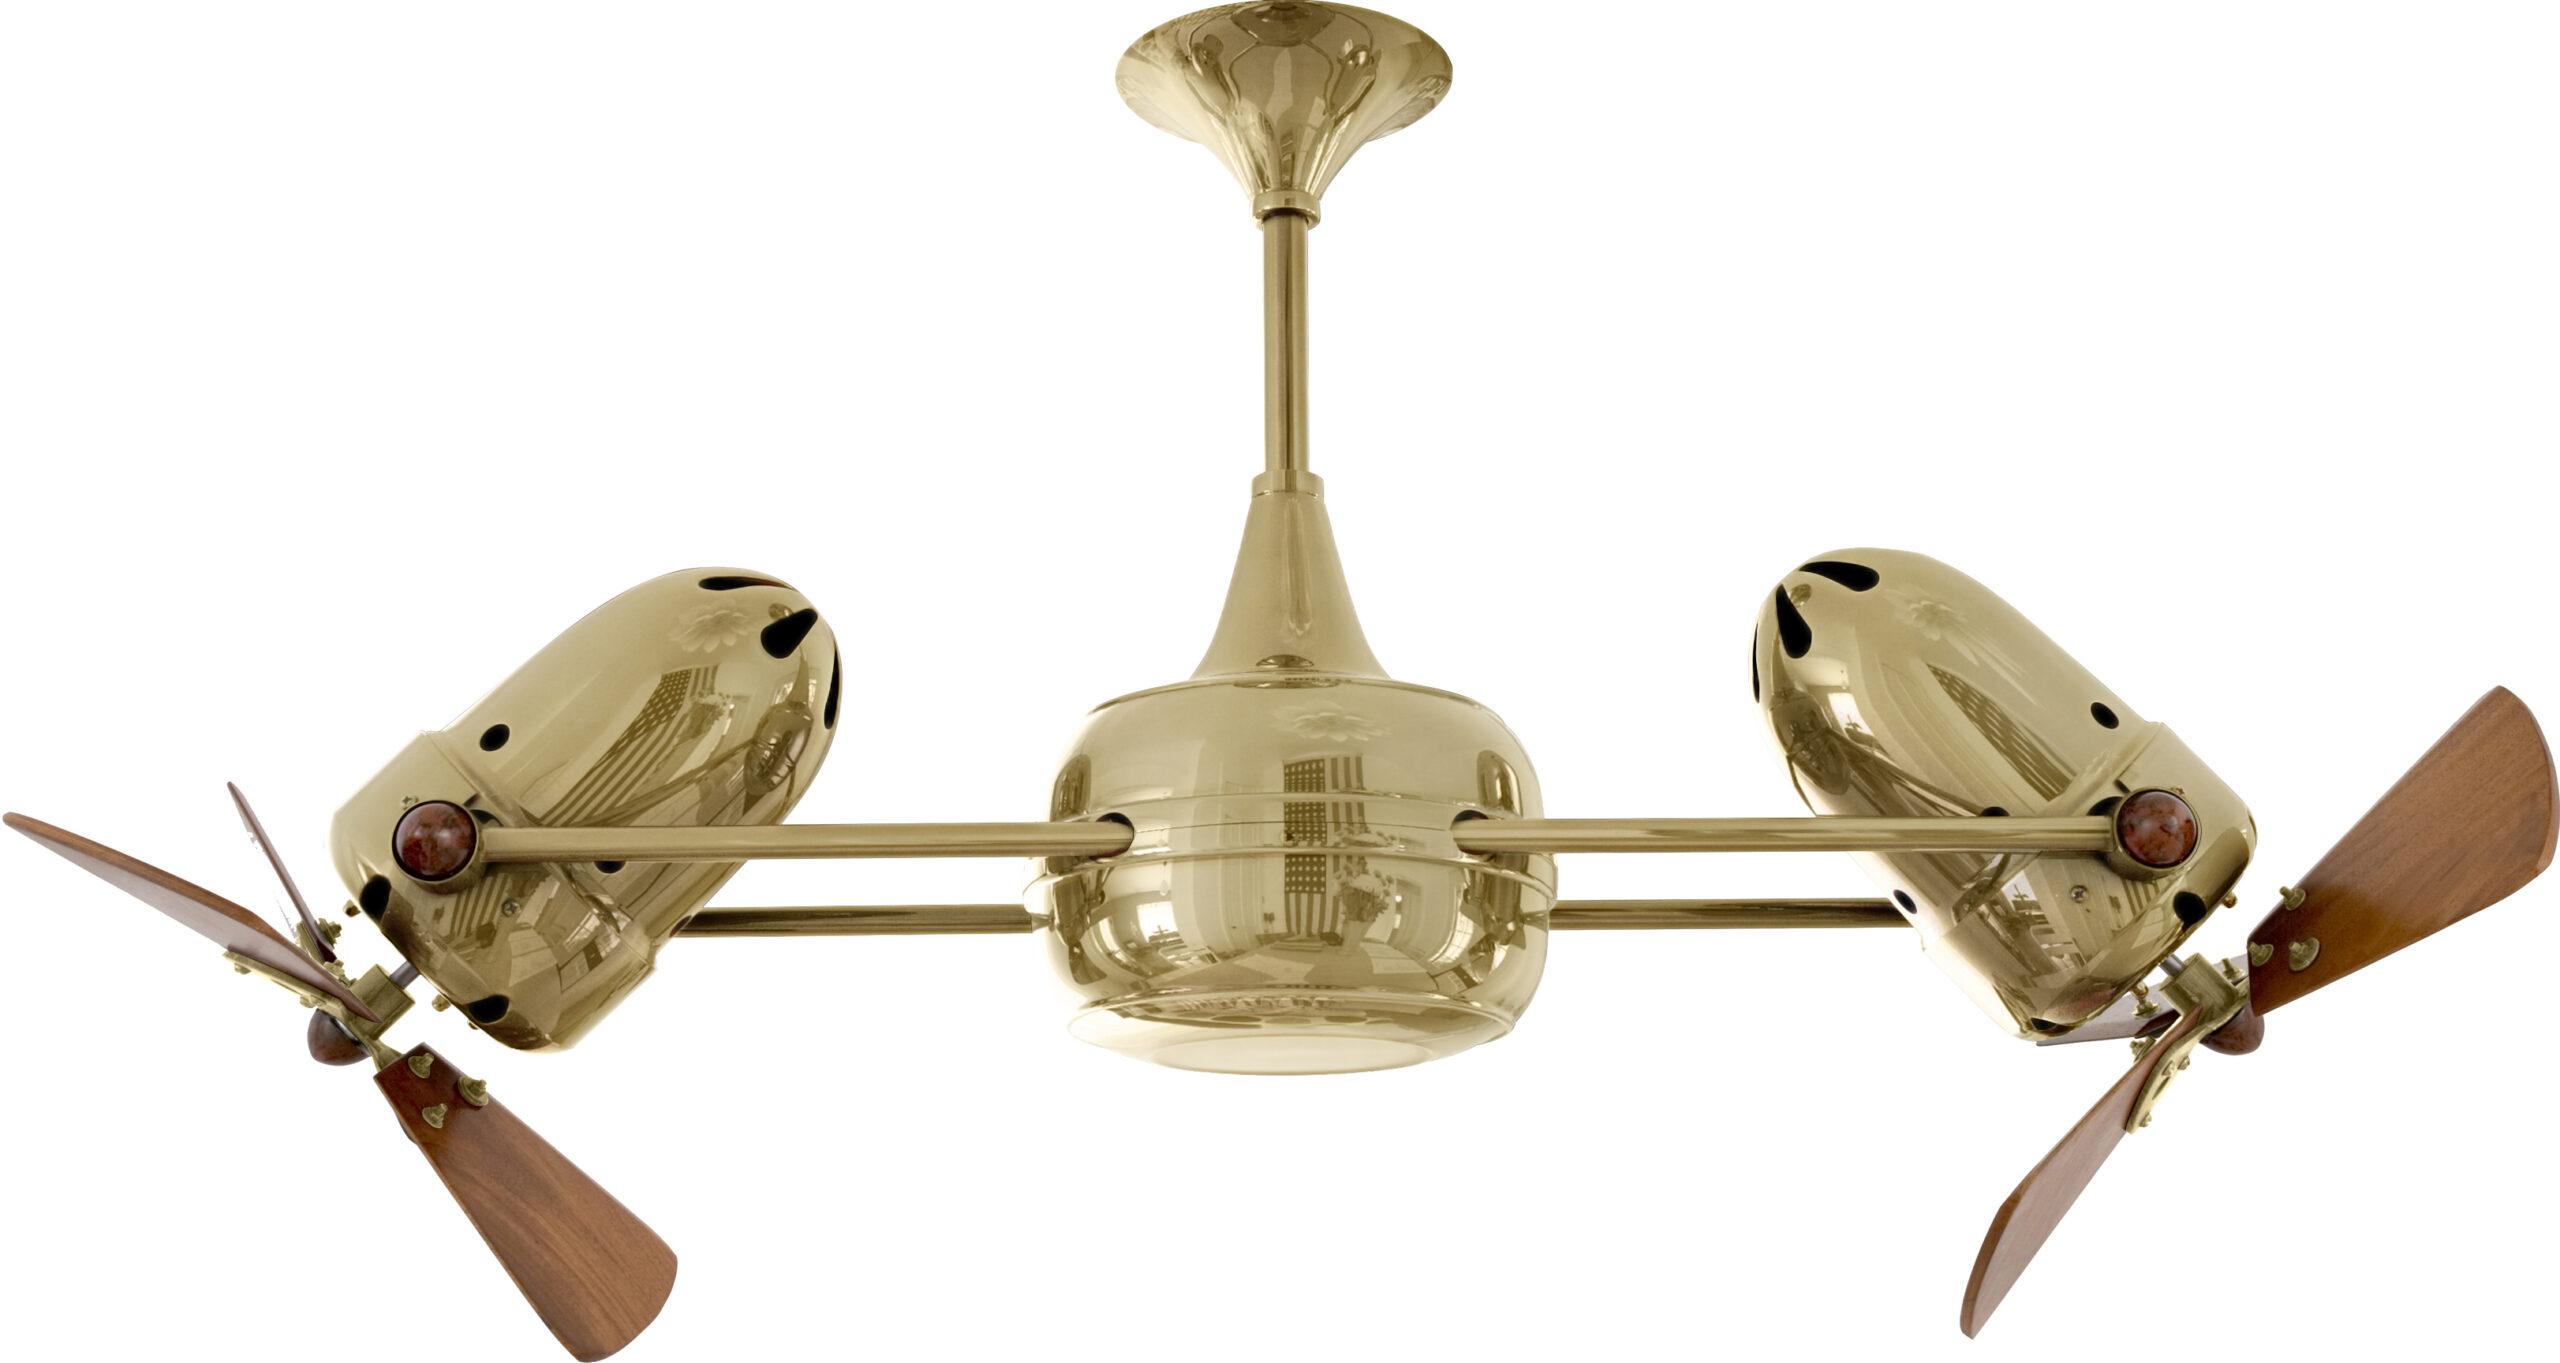 Duplo Dinamico rotational dual head ceiling fan in Polished Brass finish with solid mahoganyl blades made by Matthews Fan Company.